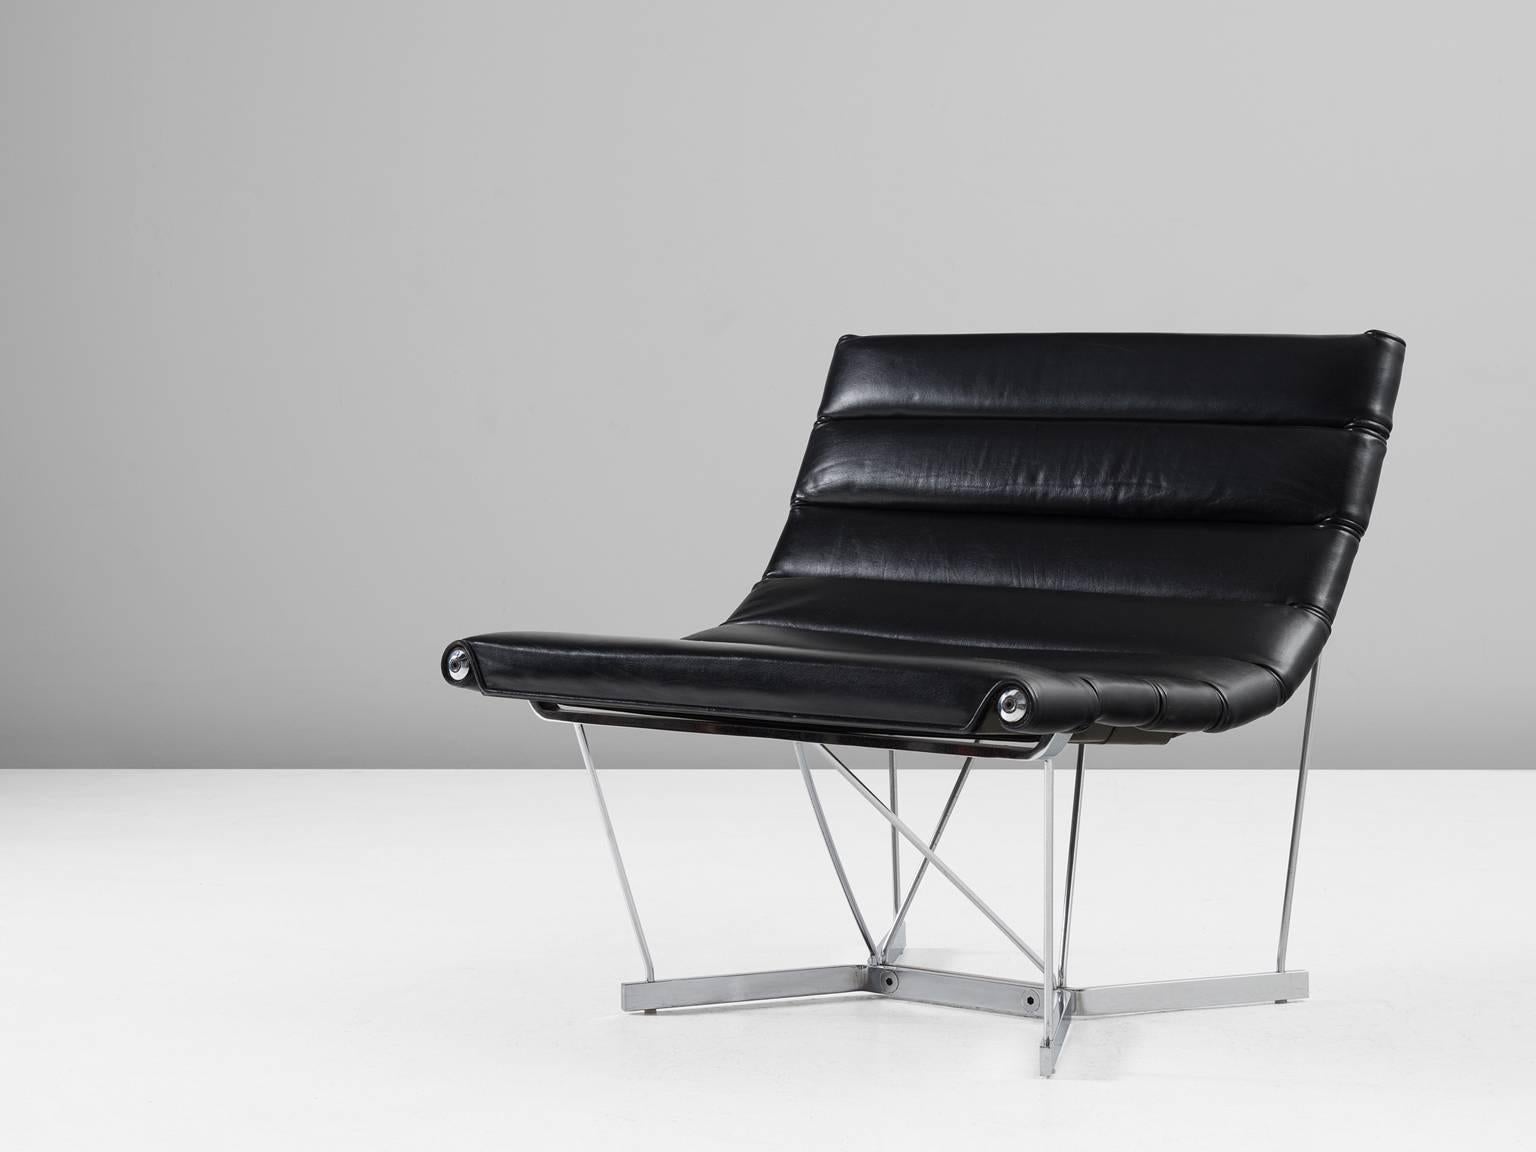 Lounge chair model 6380 or Catenary chair, in steel and leather, by George Nelson & Associates for Herman Miller, United States, 1962.
 
Model 6380 or the Catenary chair is a 1962 design from George Nelson & Associates. The special chromed